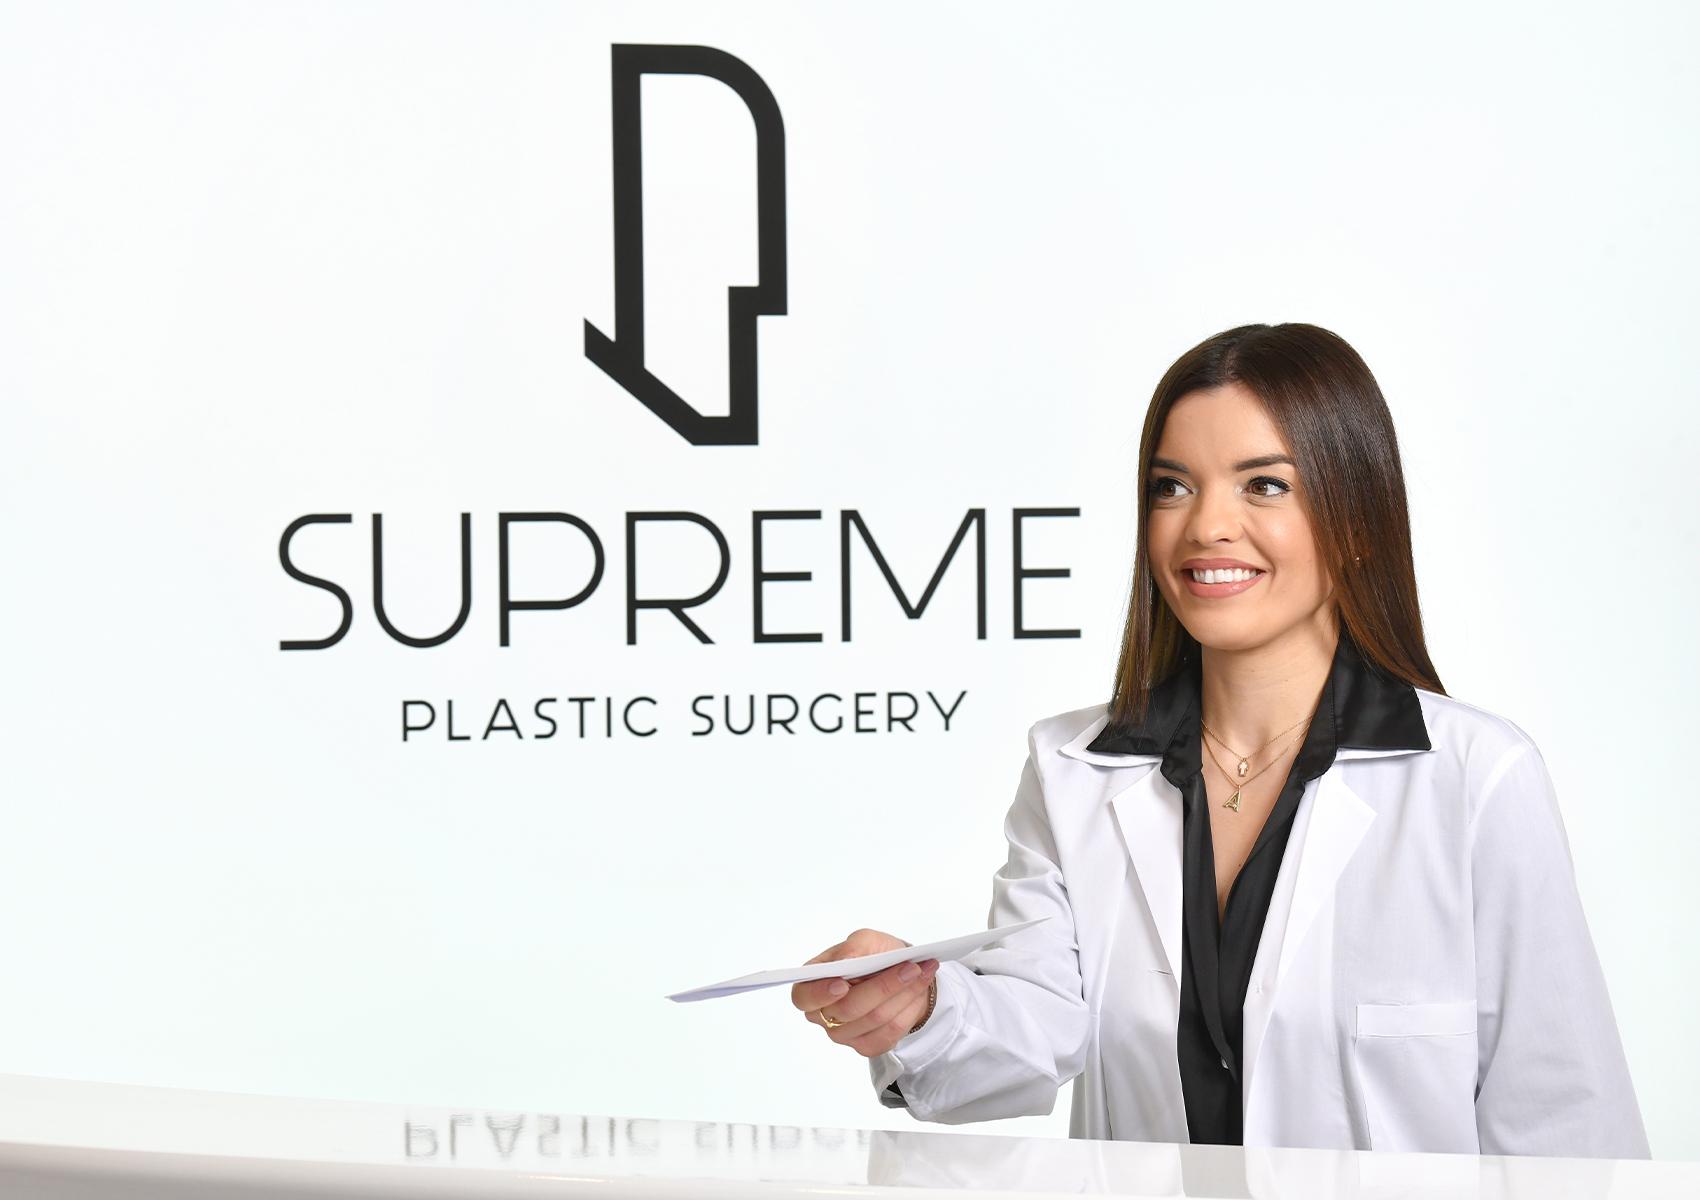 Supreme Plastic Surgery clinic3 1700x1200 by xhristakis